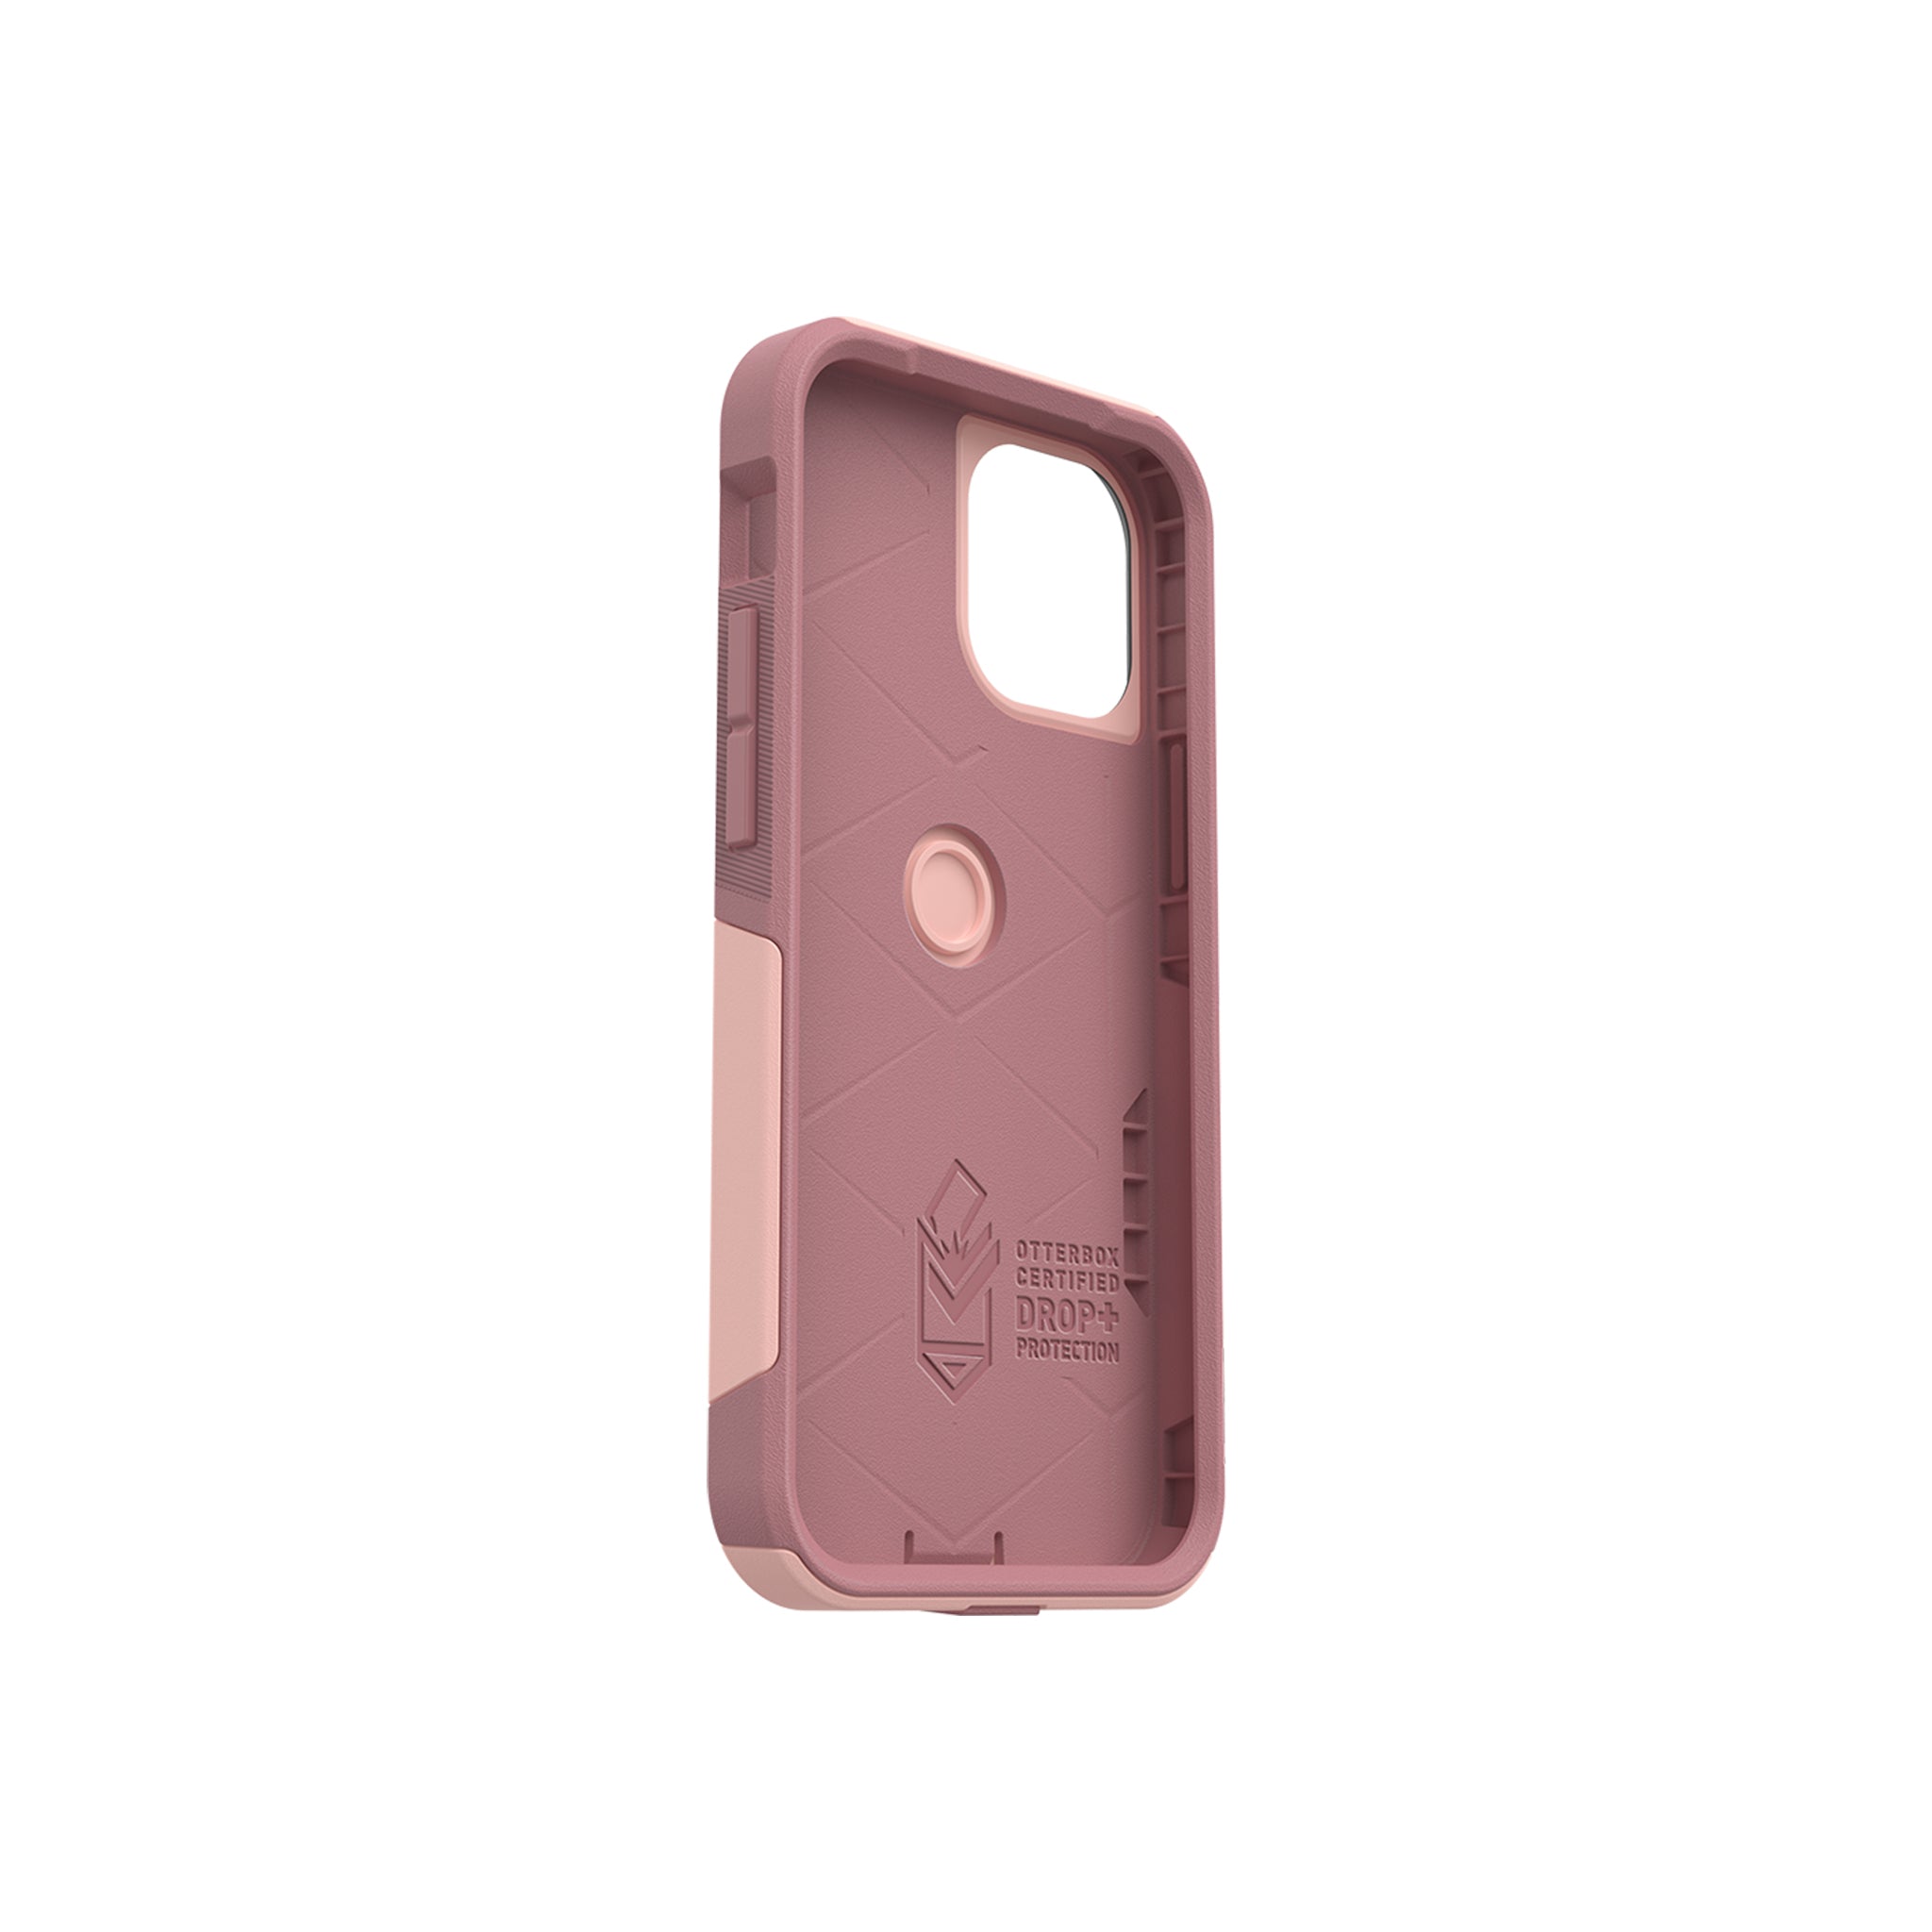 OtterBox - Commuter for iPhone 12 mini - Ballet Way